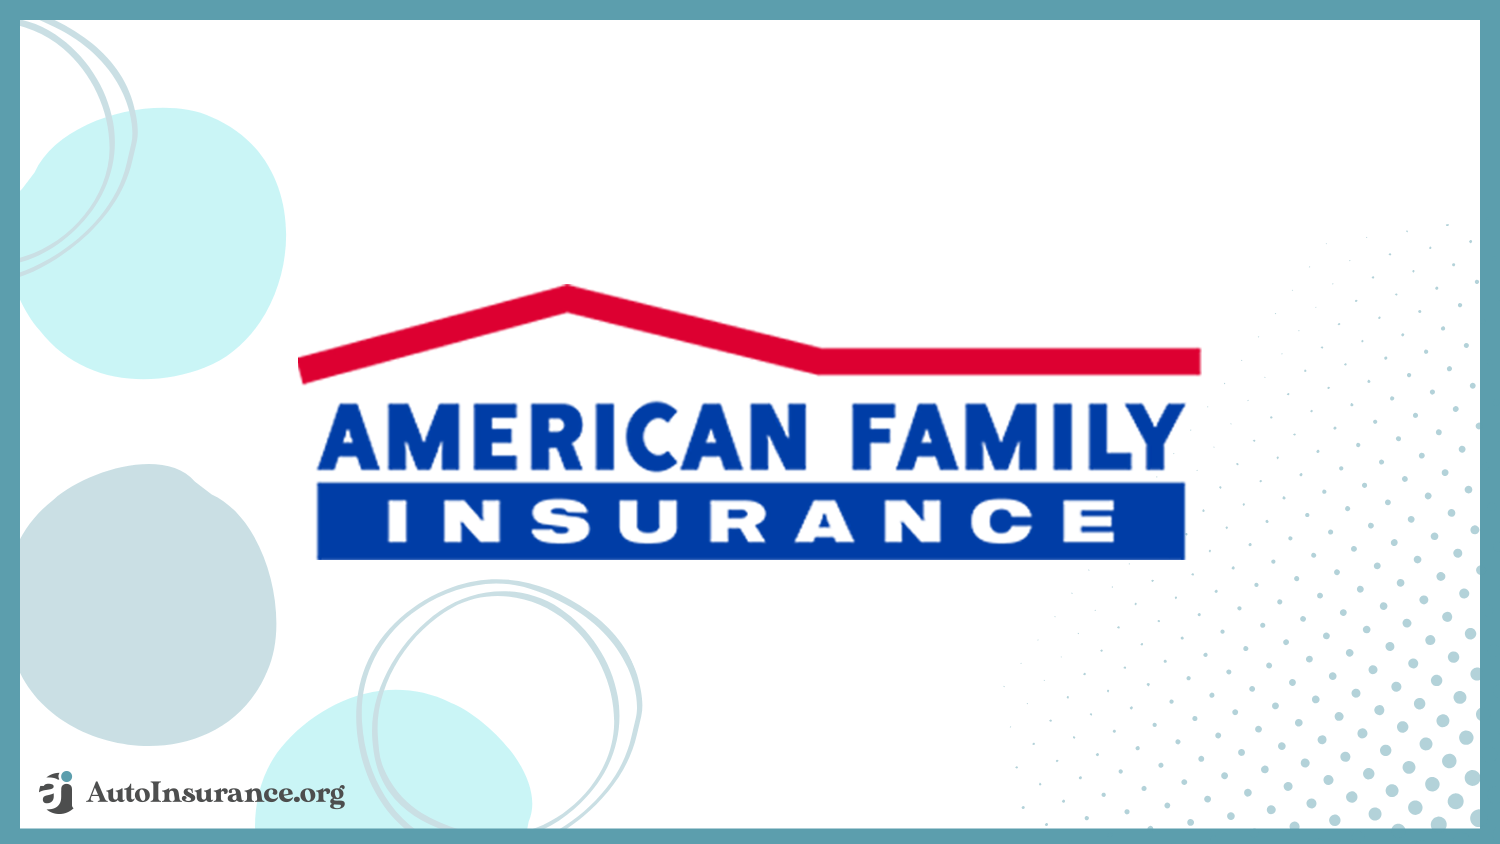 American Family: 10 Best Auto Insurance Companies for Accident Forgiveness